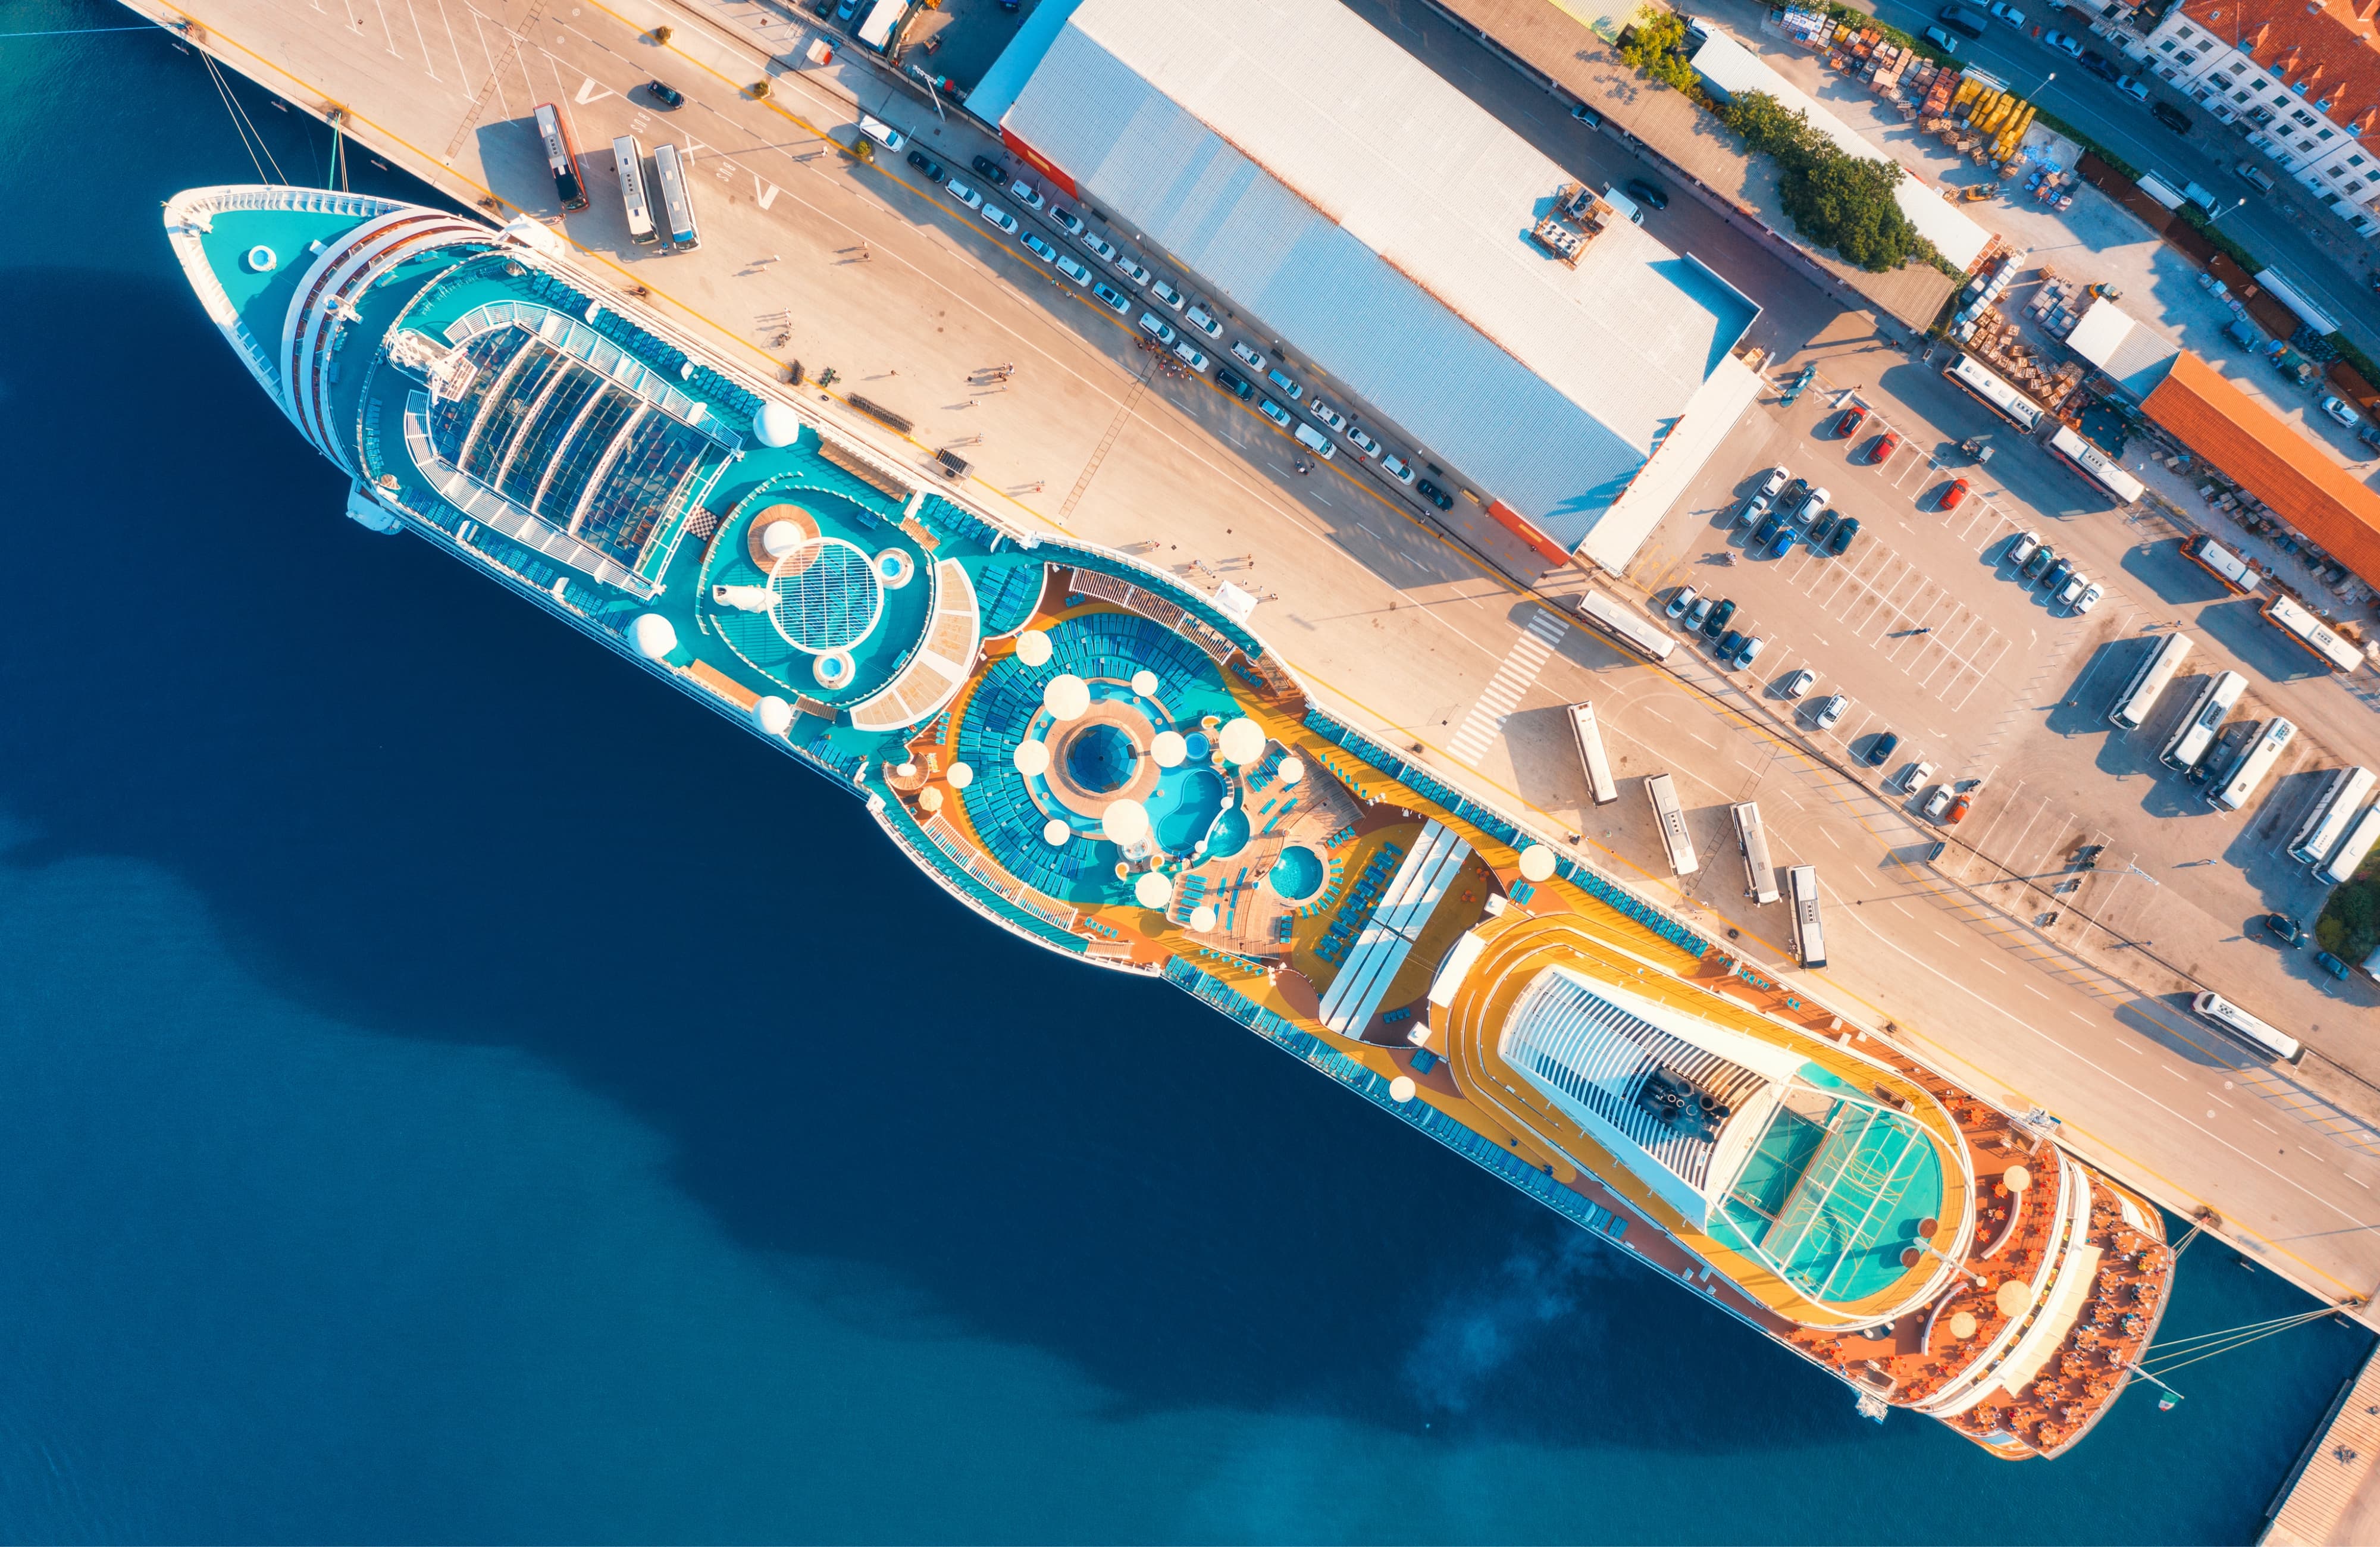 Aerial view of luxury cruise liner in port. Top view of swimming pool with sunbeds, umbrellas and deck chairs, wooden deck on the cruise ship, cars and buildings in summer. View from above